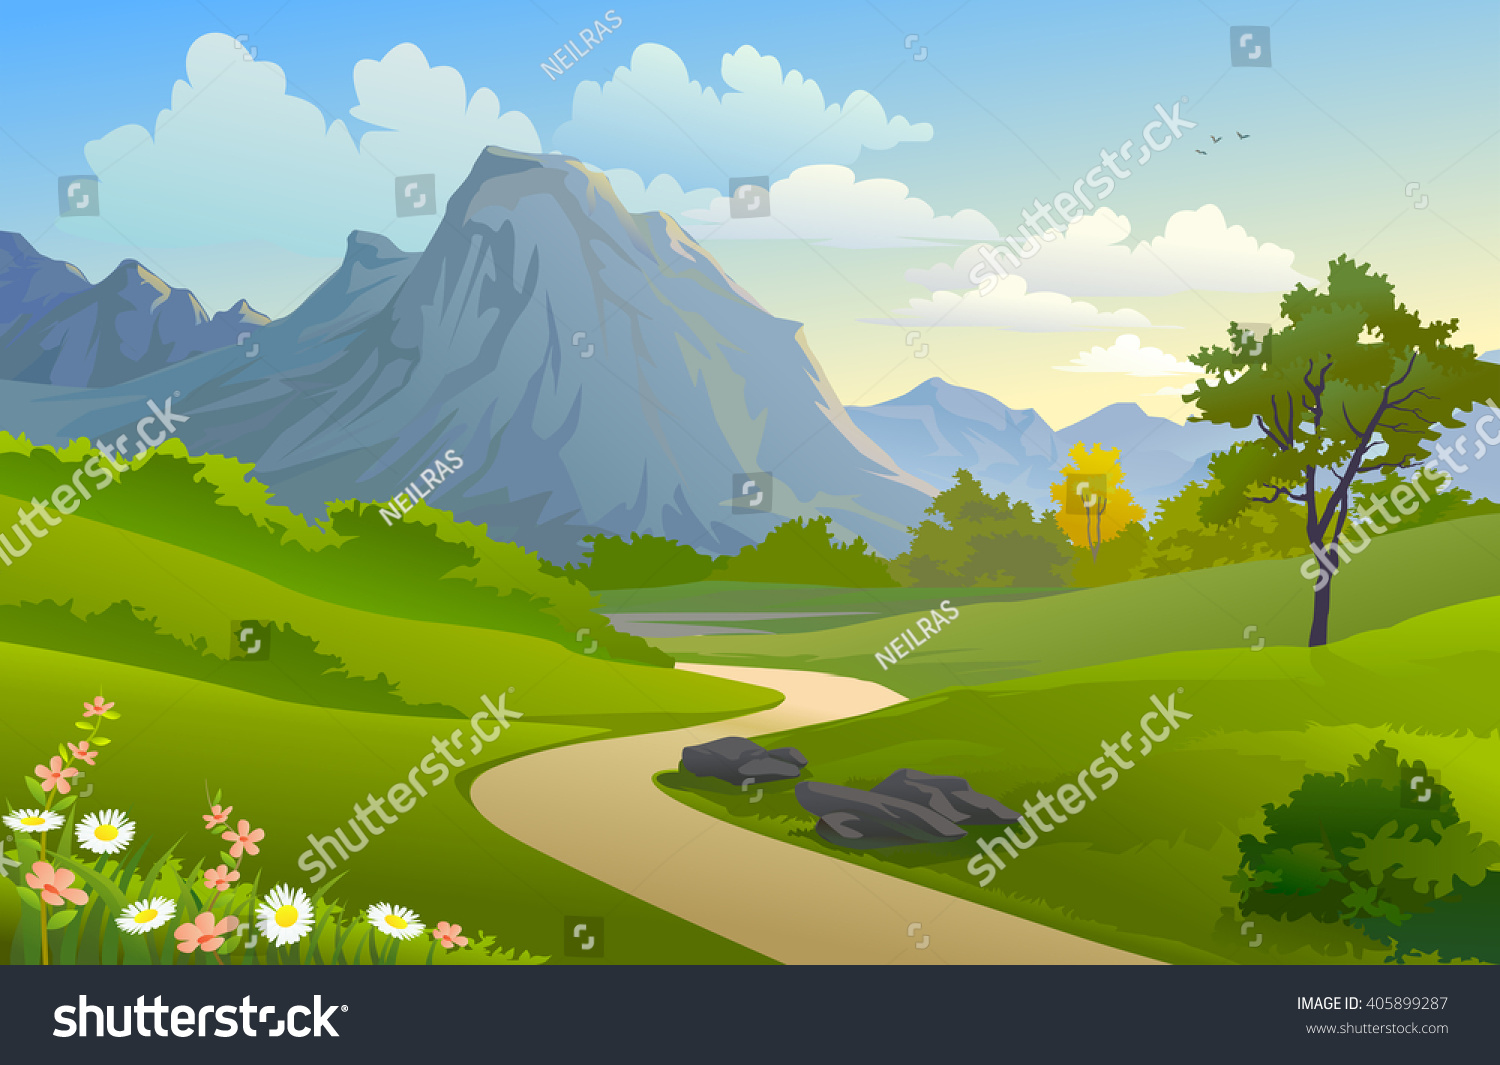 Scenic Outdoors 'Mountain And Hilly Pathway' Stock Vector Illustration ...